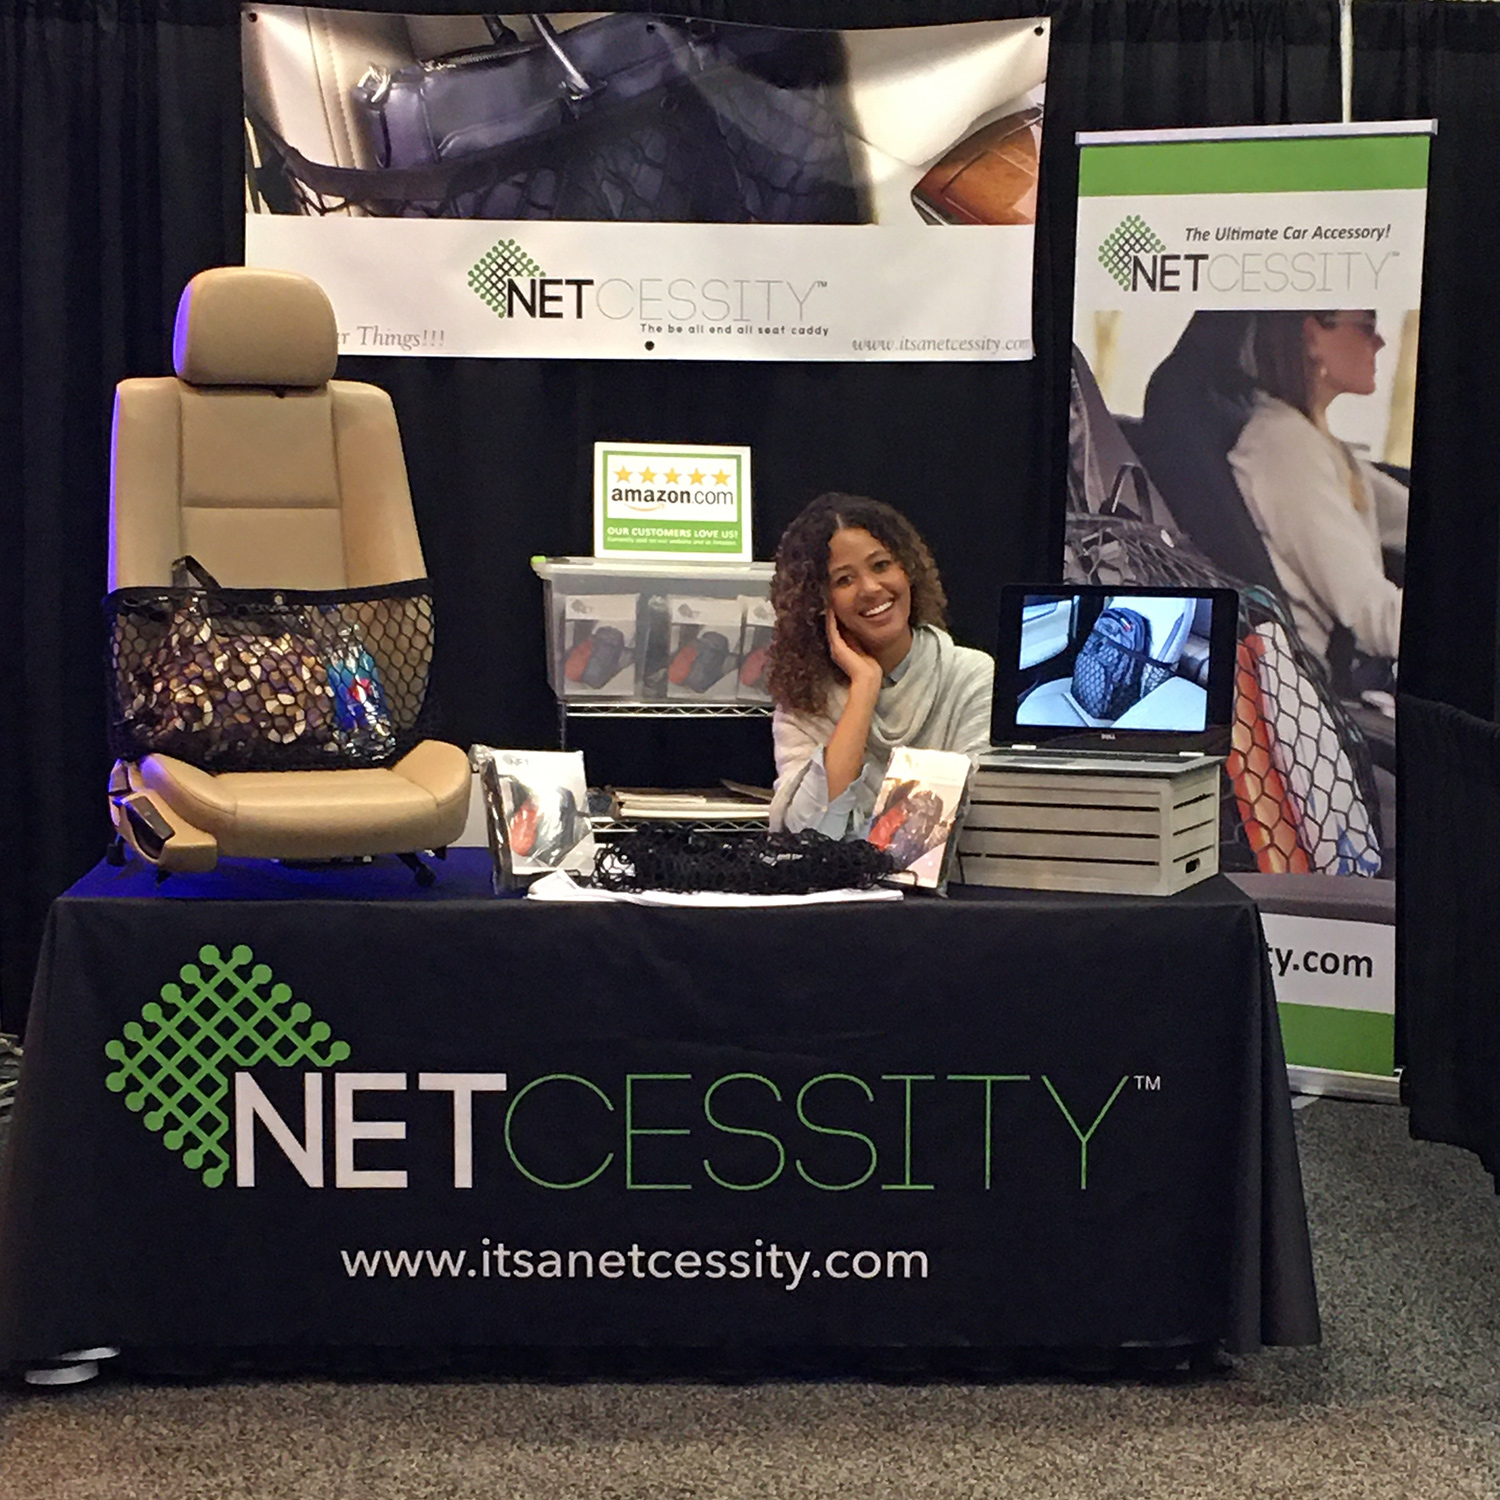 A smiling woman sits at a booth with a black tablecloth that says “Netcessity” and has a carseat with the Netcessity product on it and items inside the net. Banners surround the booth.